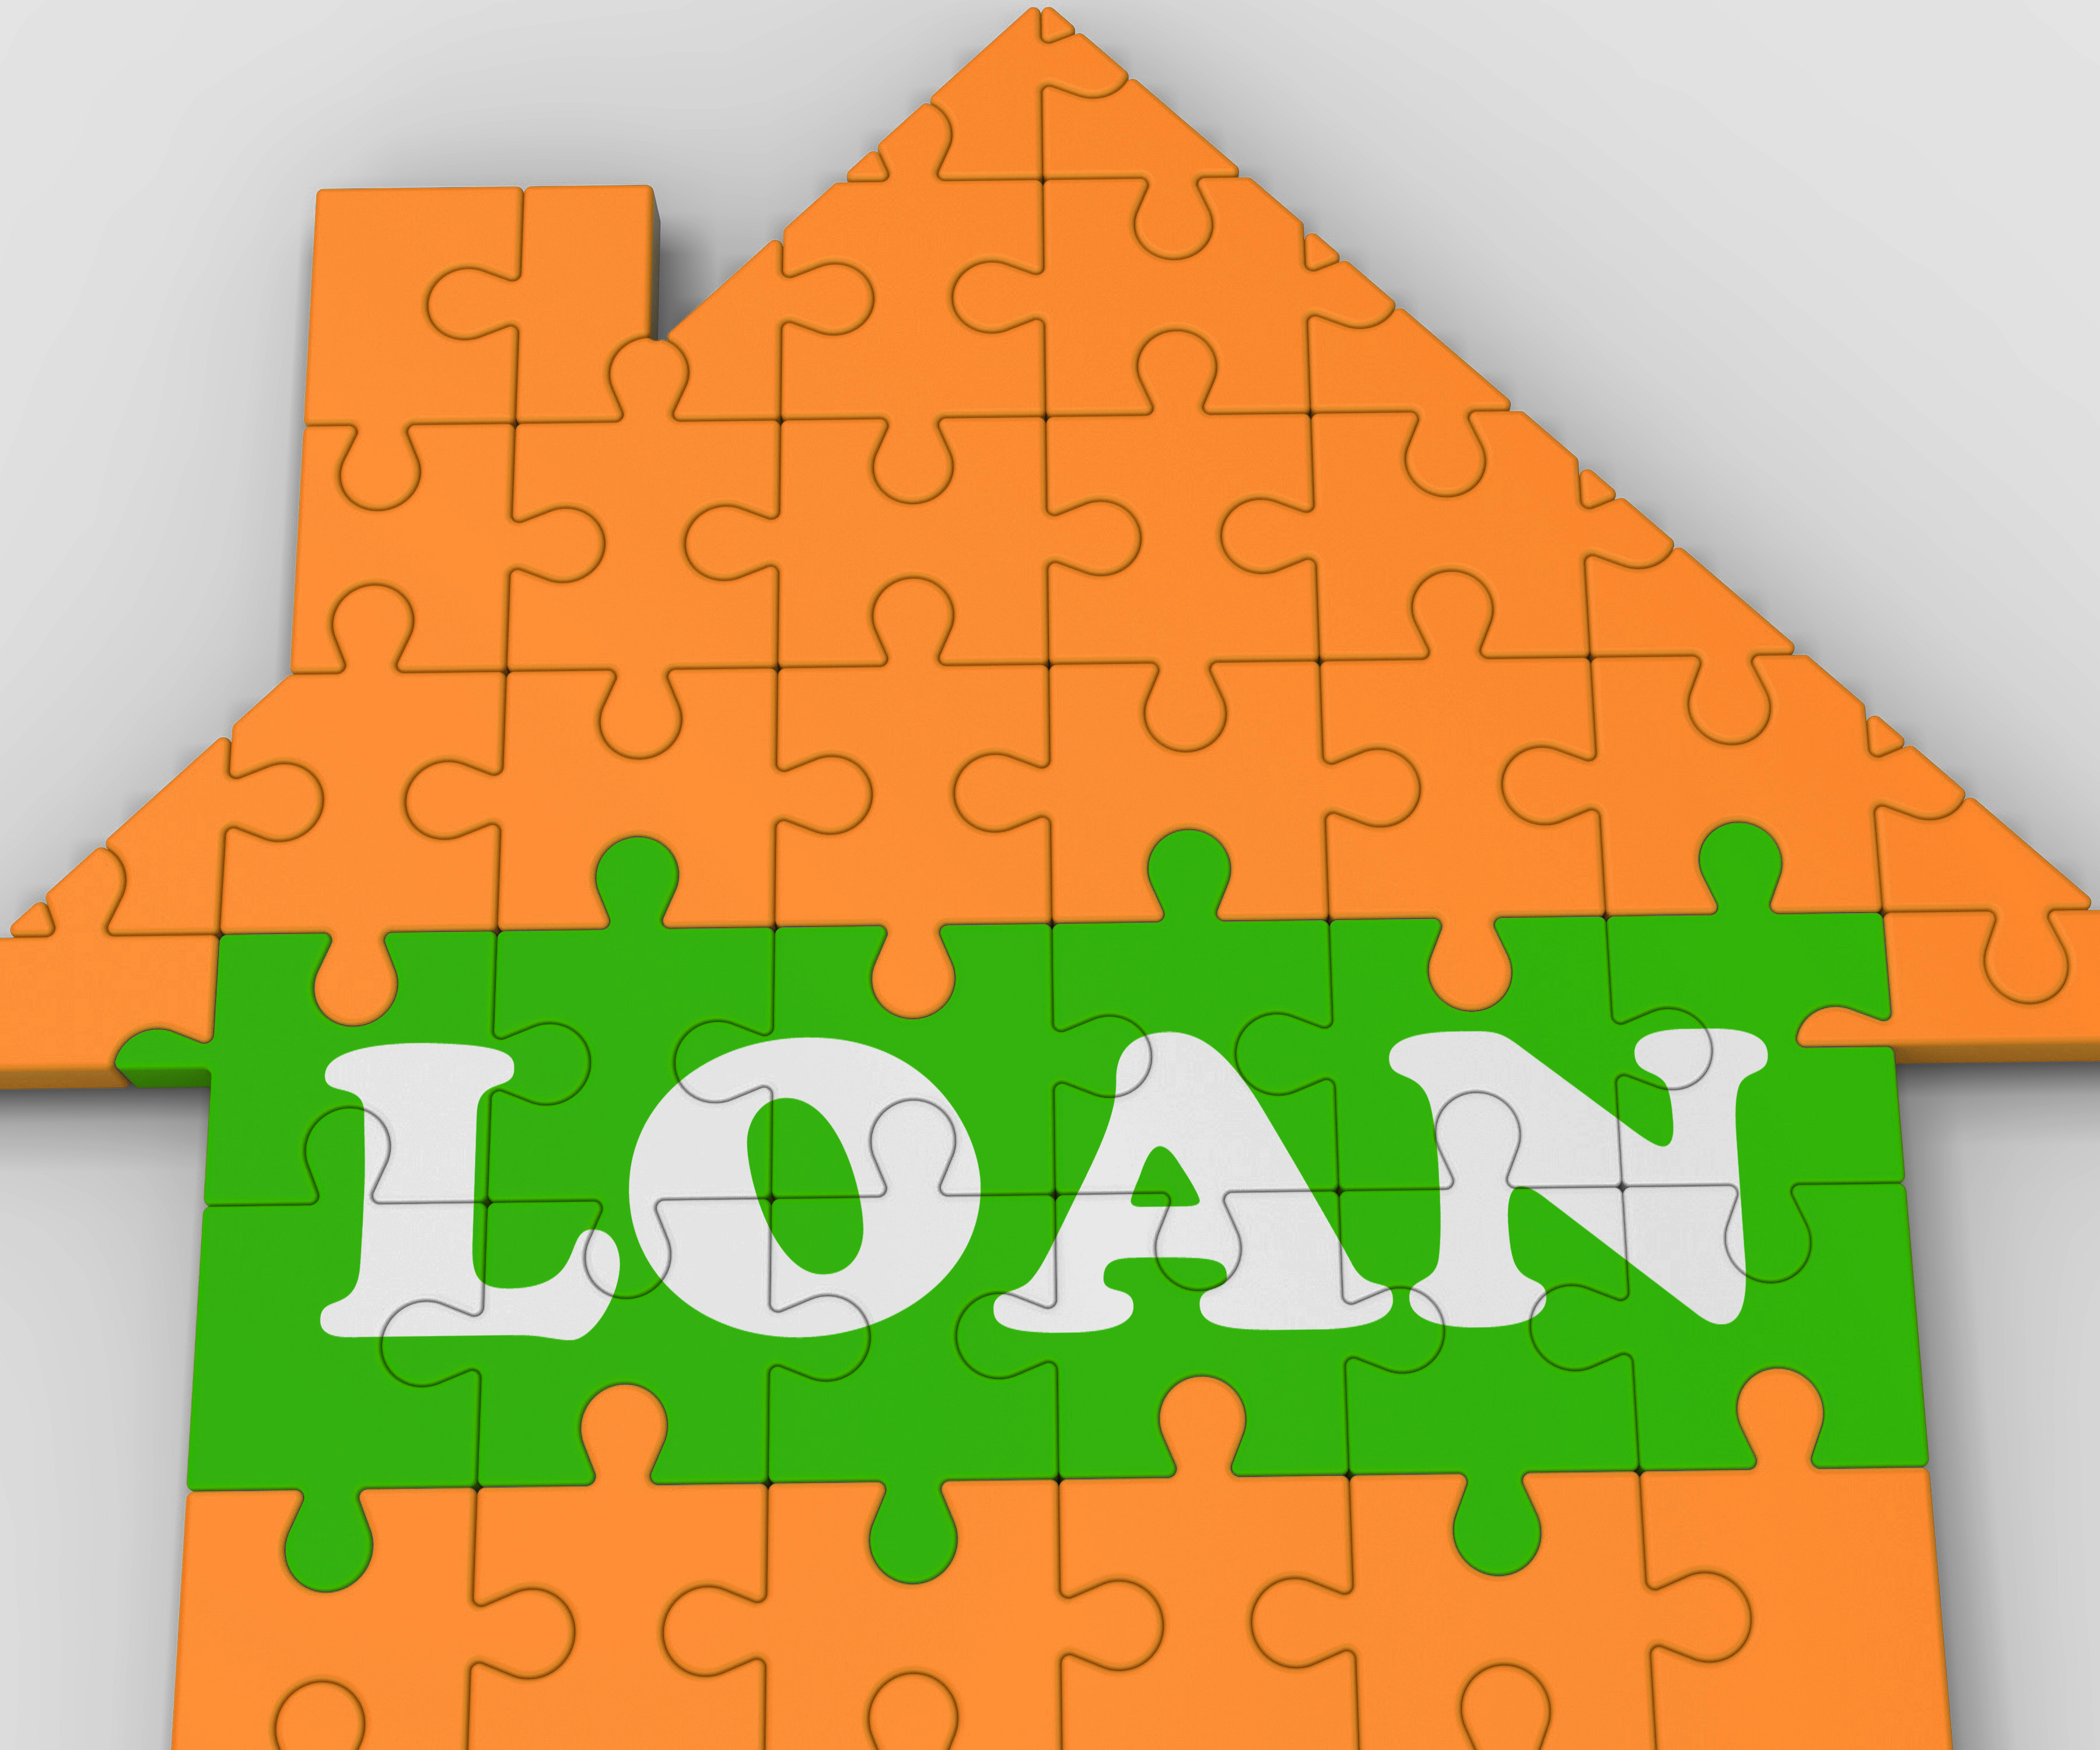 Find the right loan.